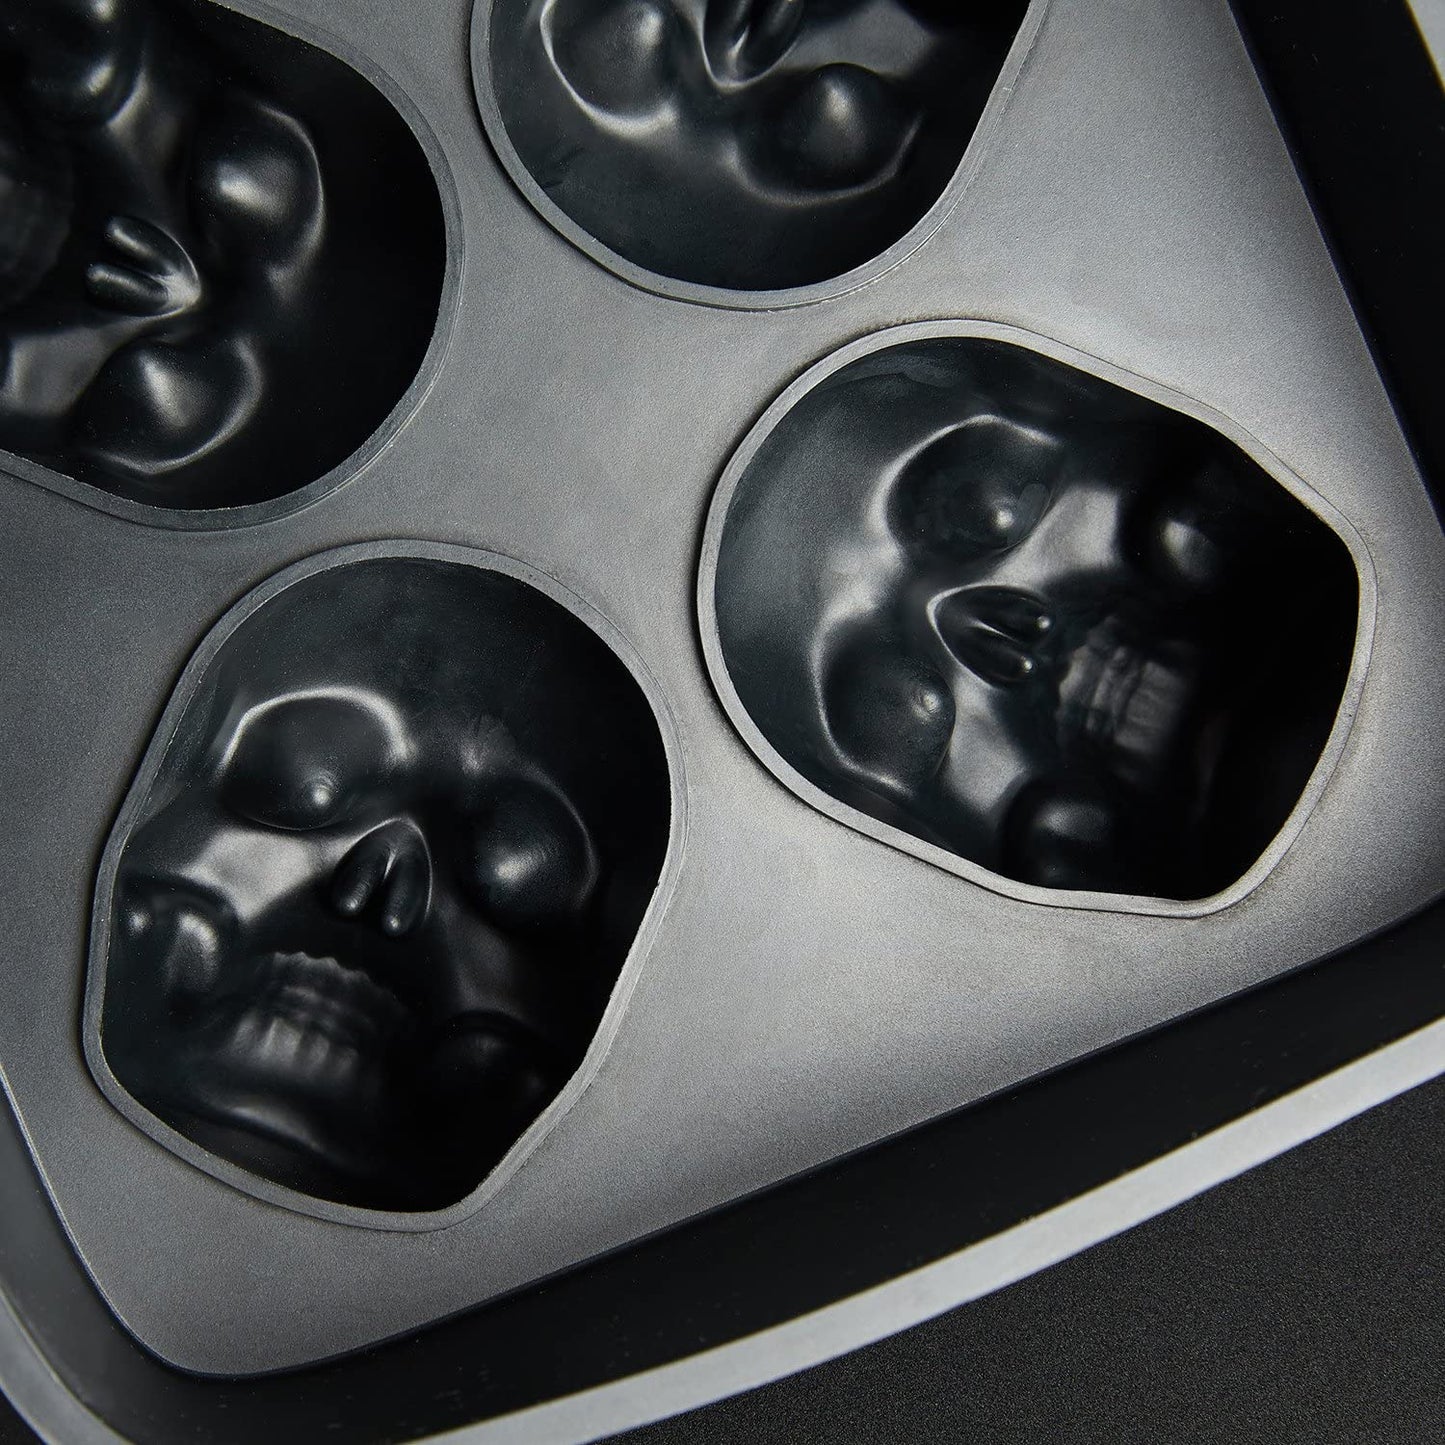 A close-up view of a black silicone food grade skull ice cube mold tray showing the skulls of the mold close-up.